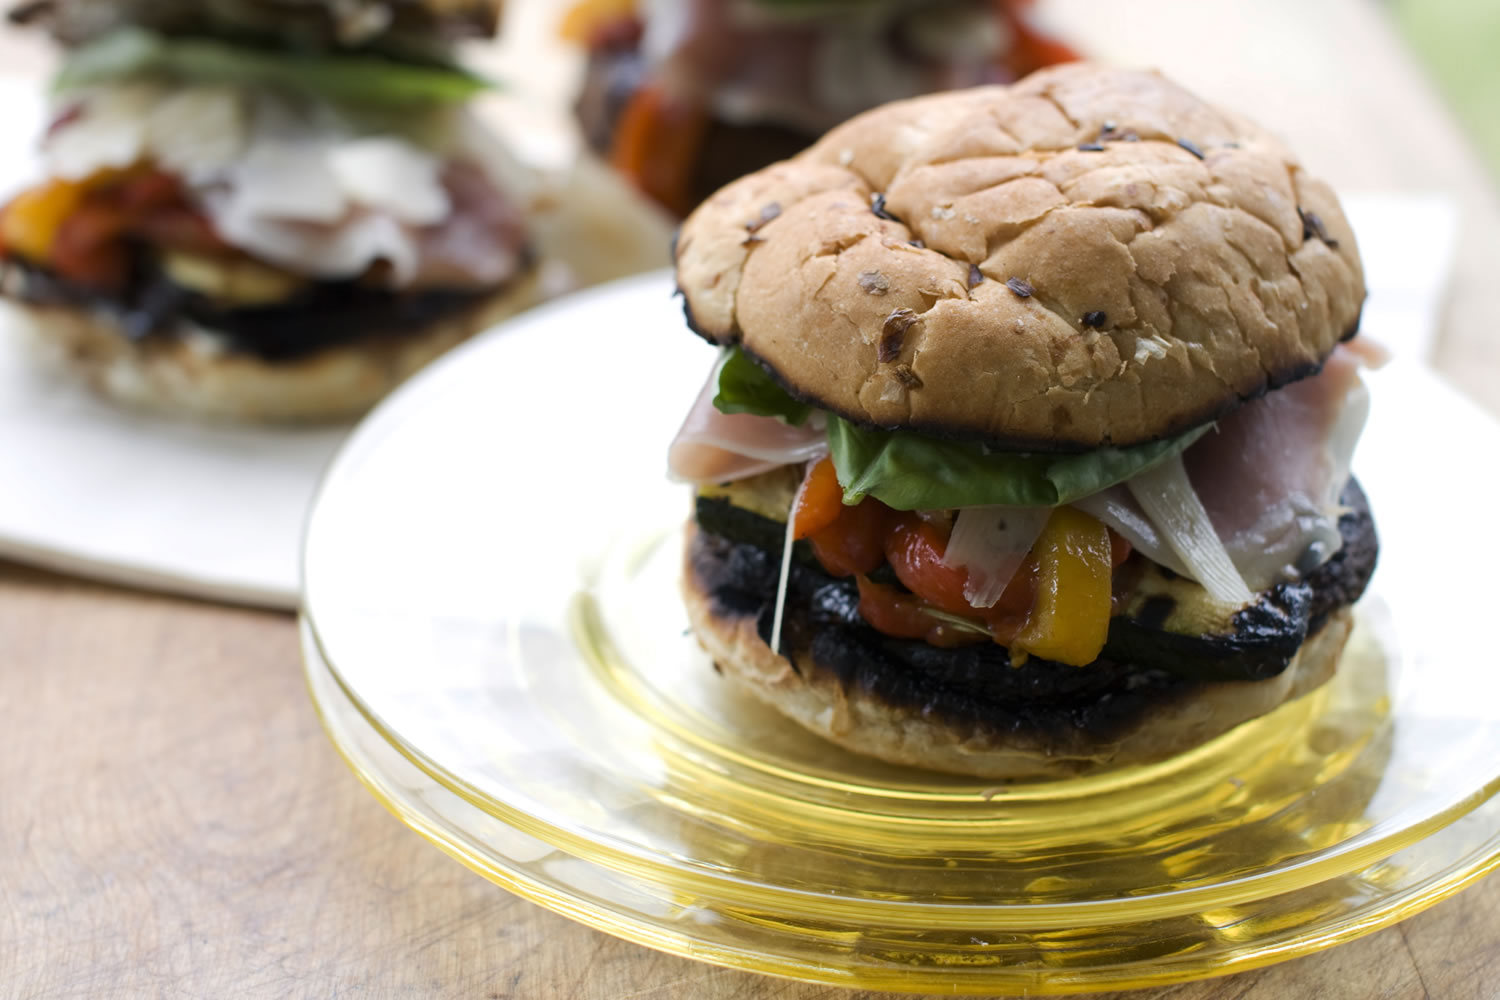 Grilled Veggie Sandwiches With Roasted Garlic Mayonnaise start with a bounty of vegetables from the farmers markets.